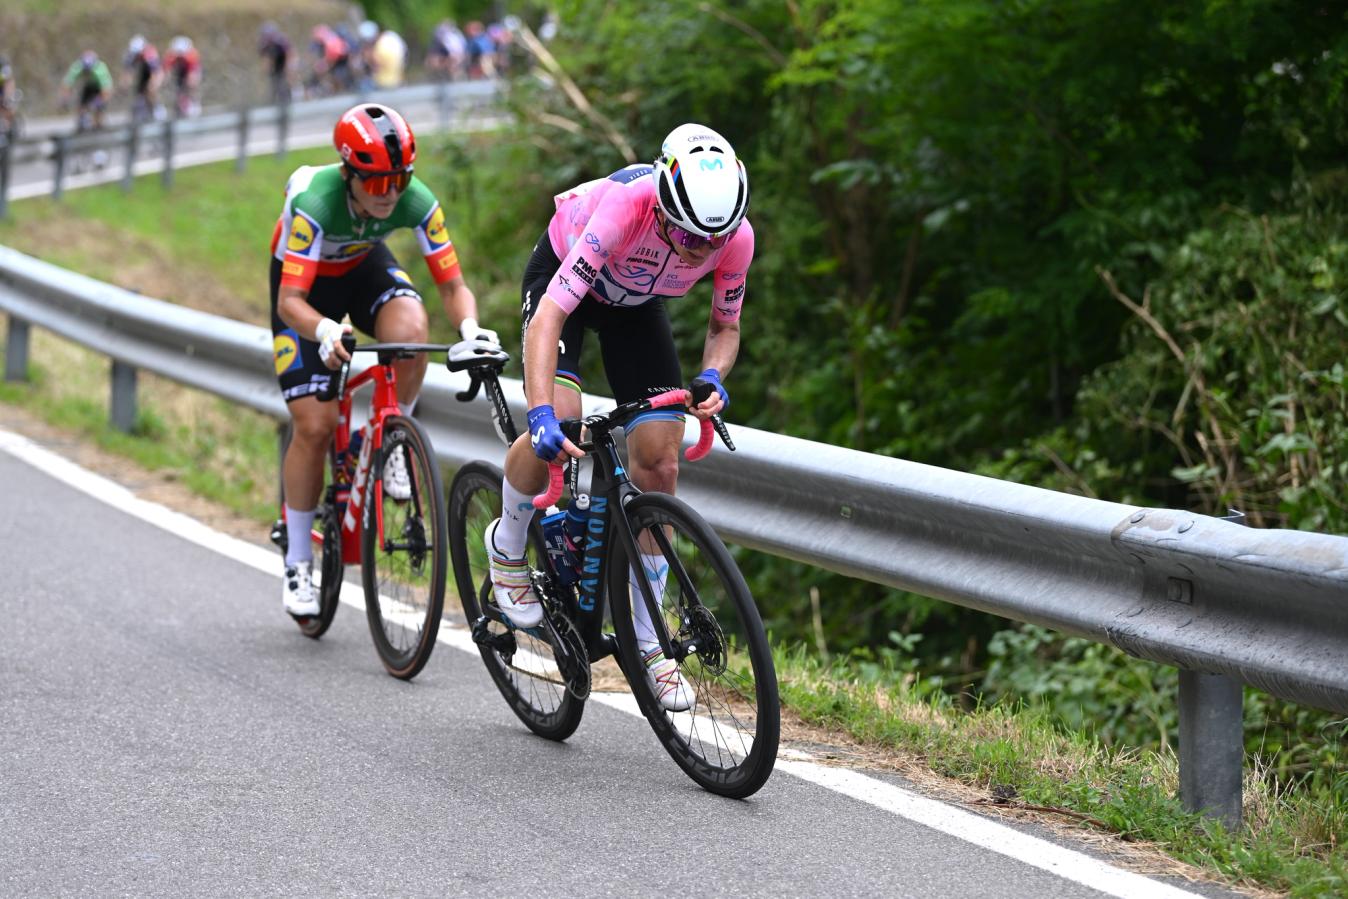 Elisa Longo Borghini (Lidl-Trek) was the only rider who could go with Annemiek van Vleuten (Movistar) in the early part of the Giro d'Italia Donne